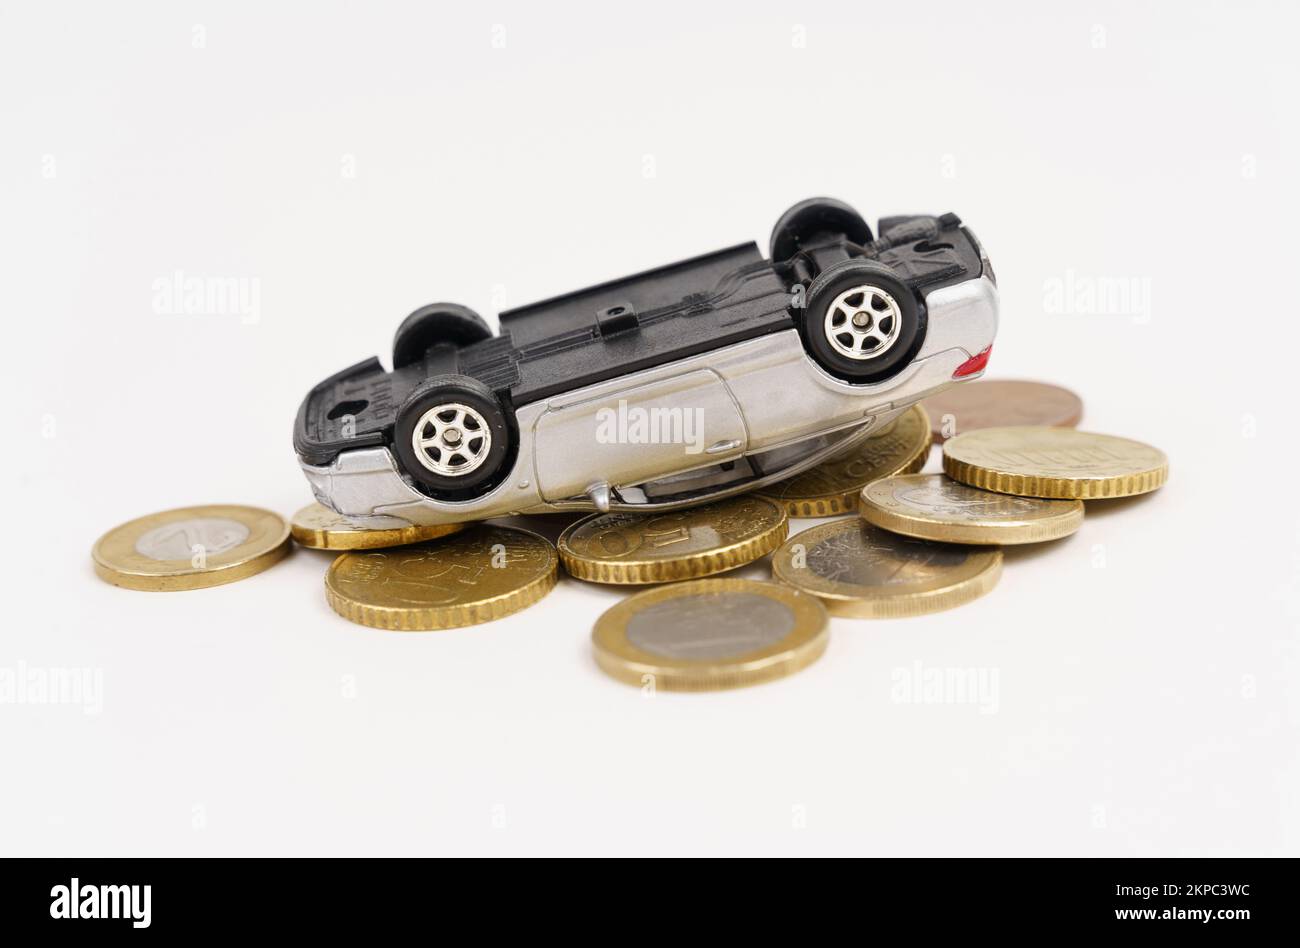 Traffic accident, car insurance concept. The silver car is turned upside down and rests on the coins. Stock Photo